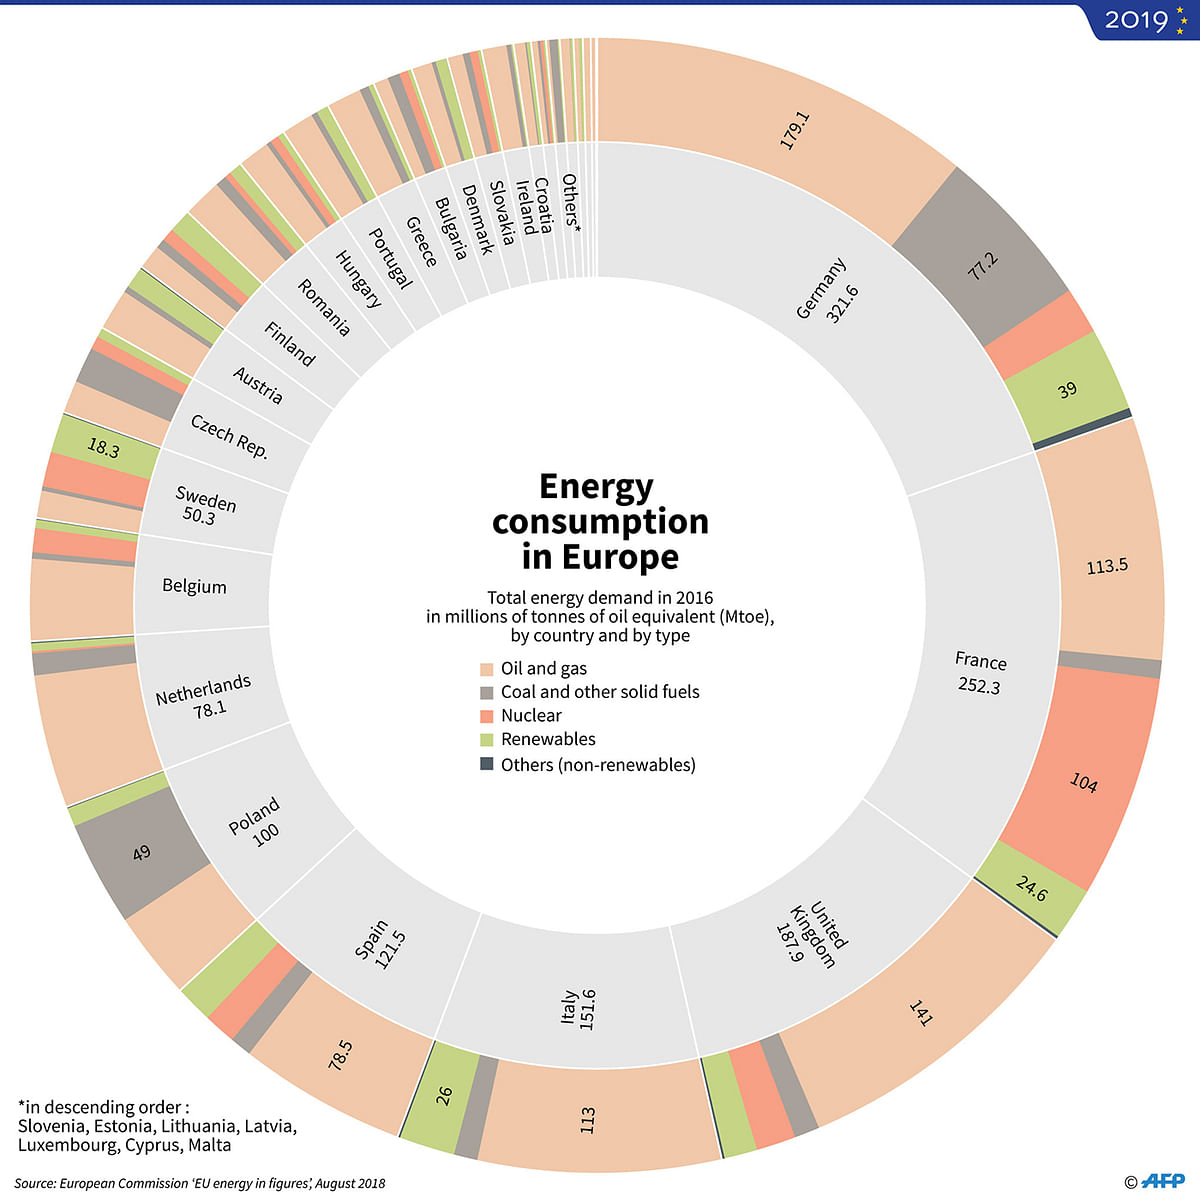 Total energy demand in European Union countries by type of energy (oil, gas, coal, renewable energy) in 2016, according to Eurostat data. AFP illustration